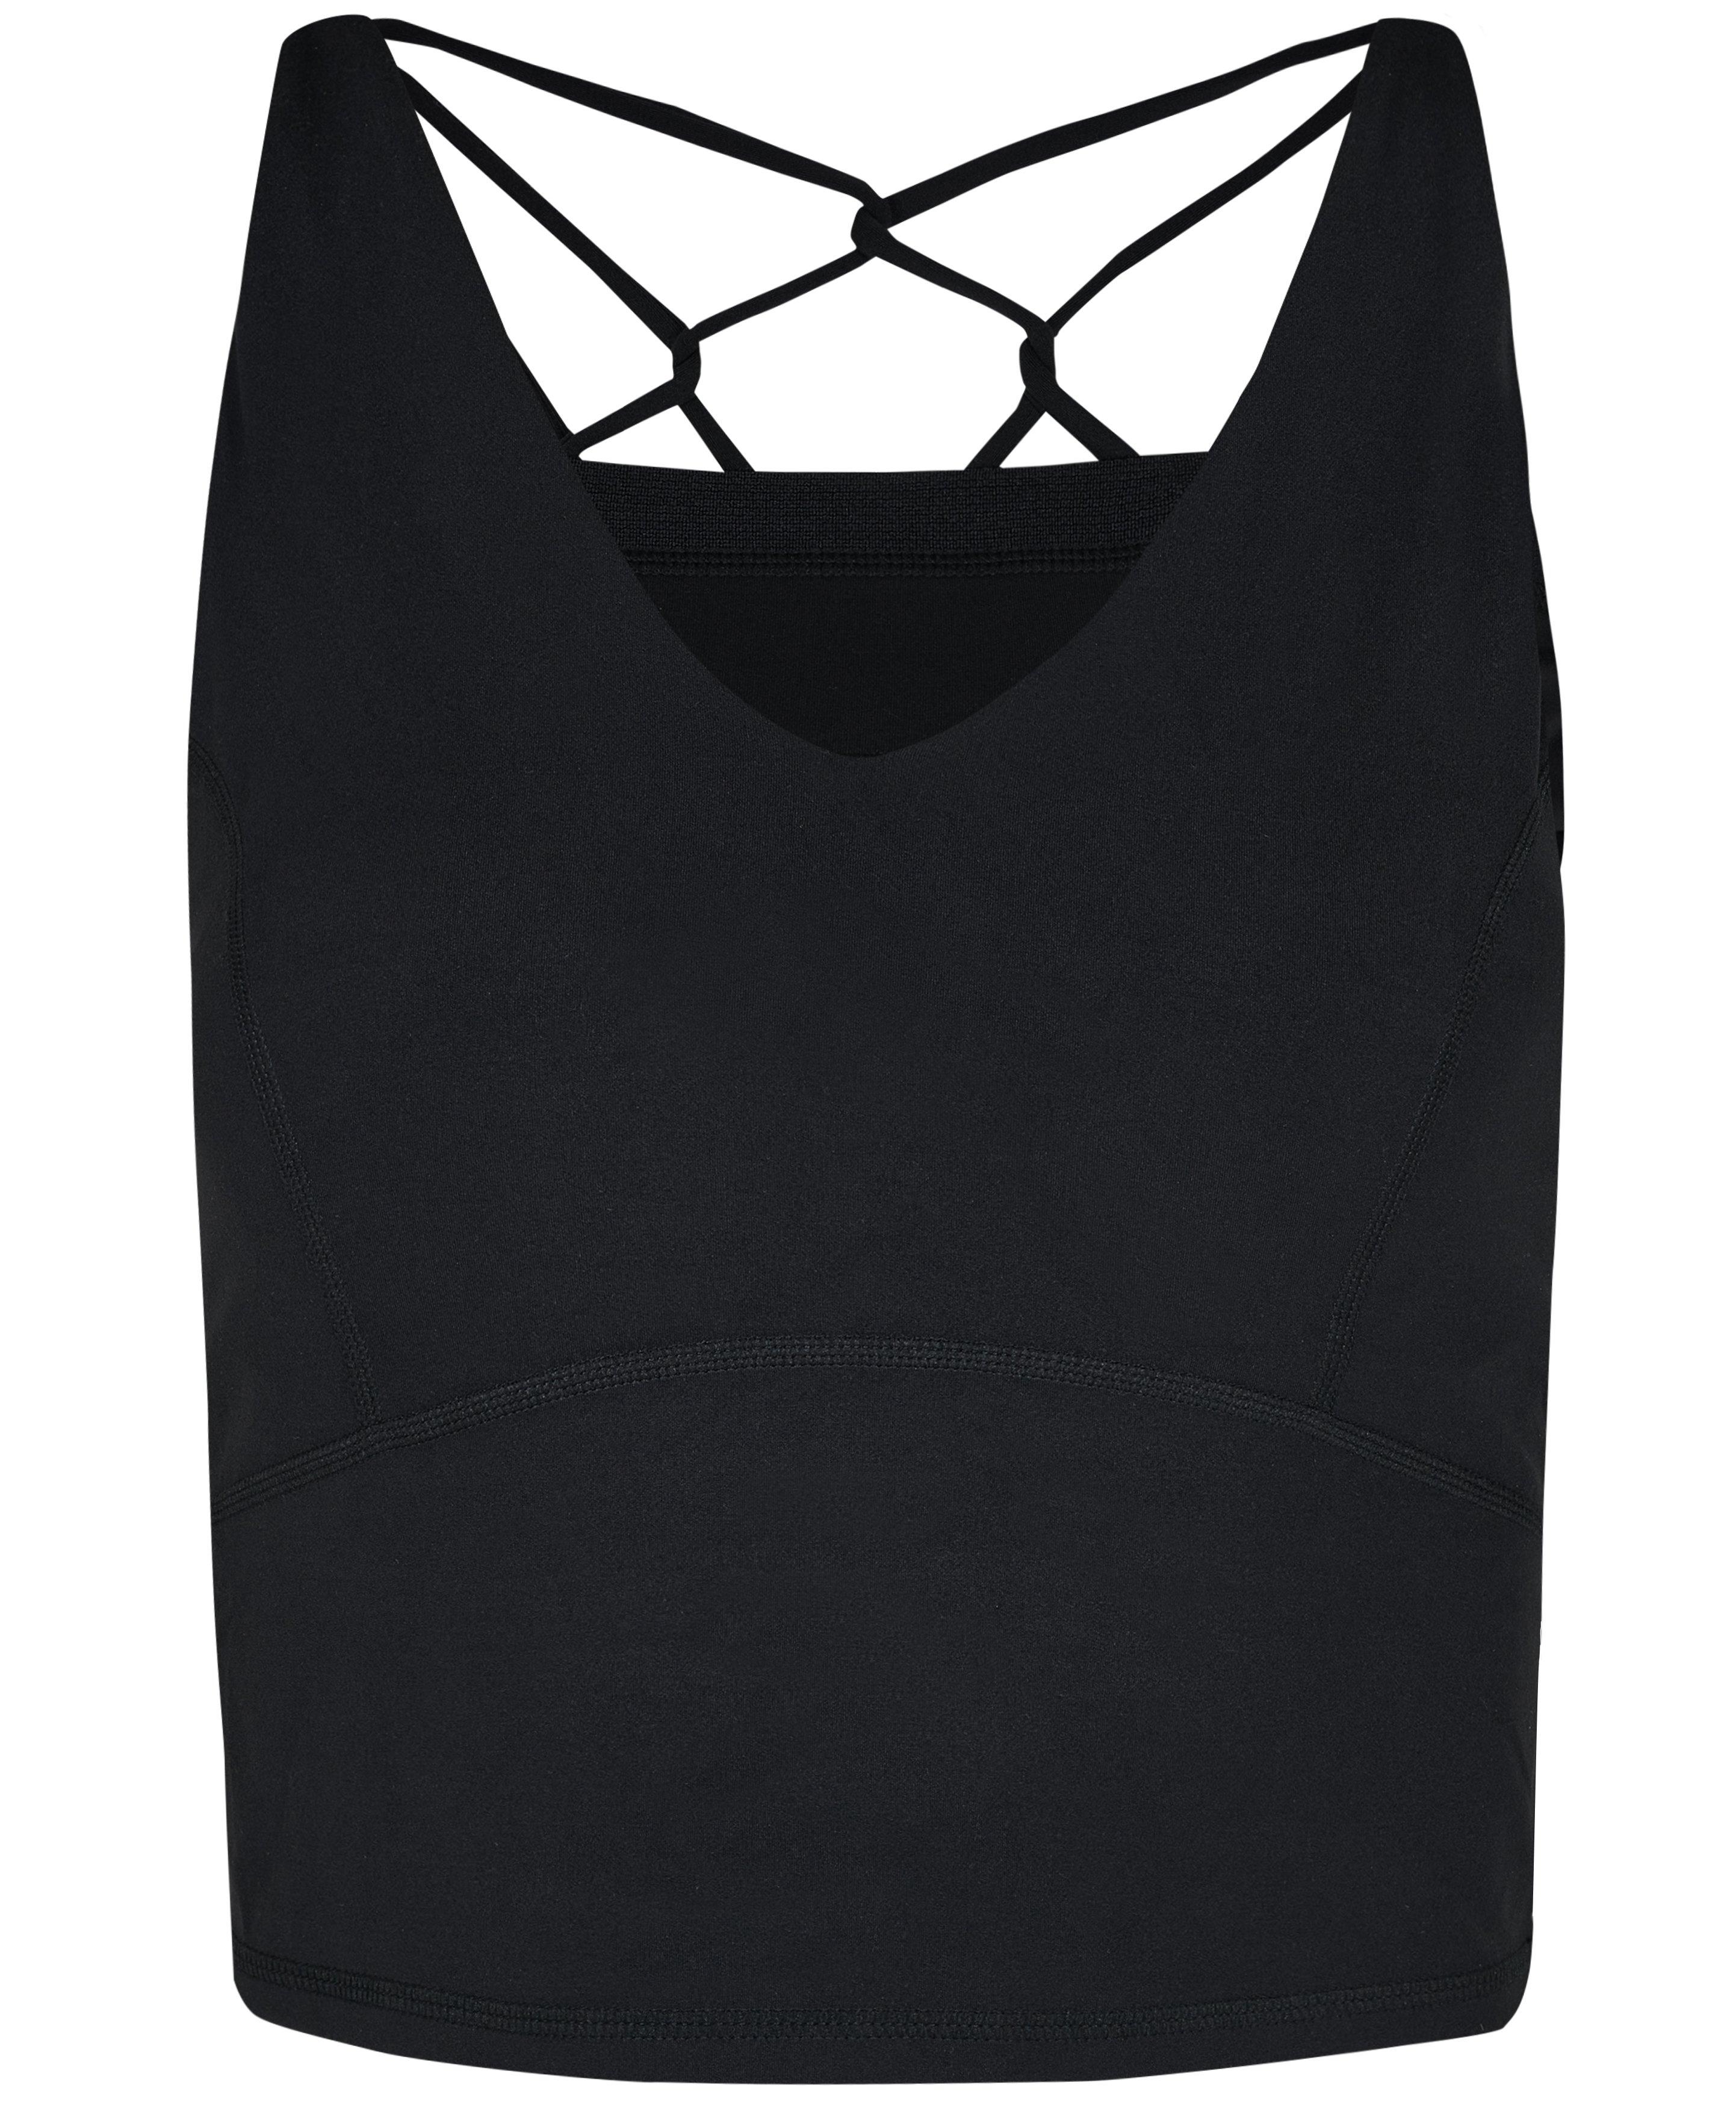 Buy Women's Tank Tops Built in Bra Workout Clothes Strappy Back